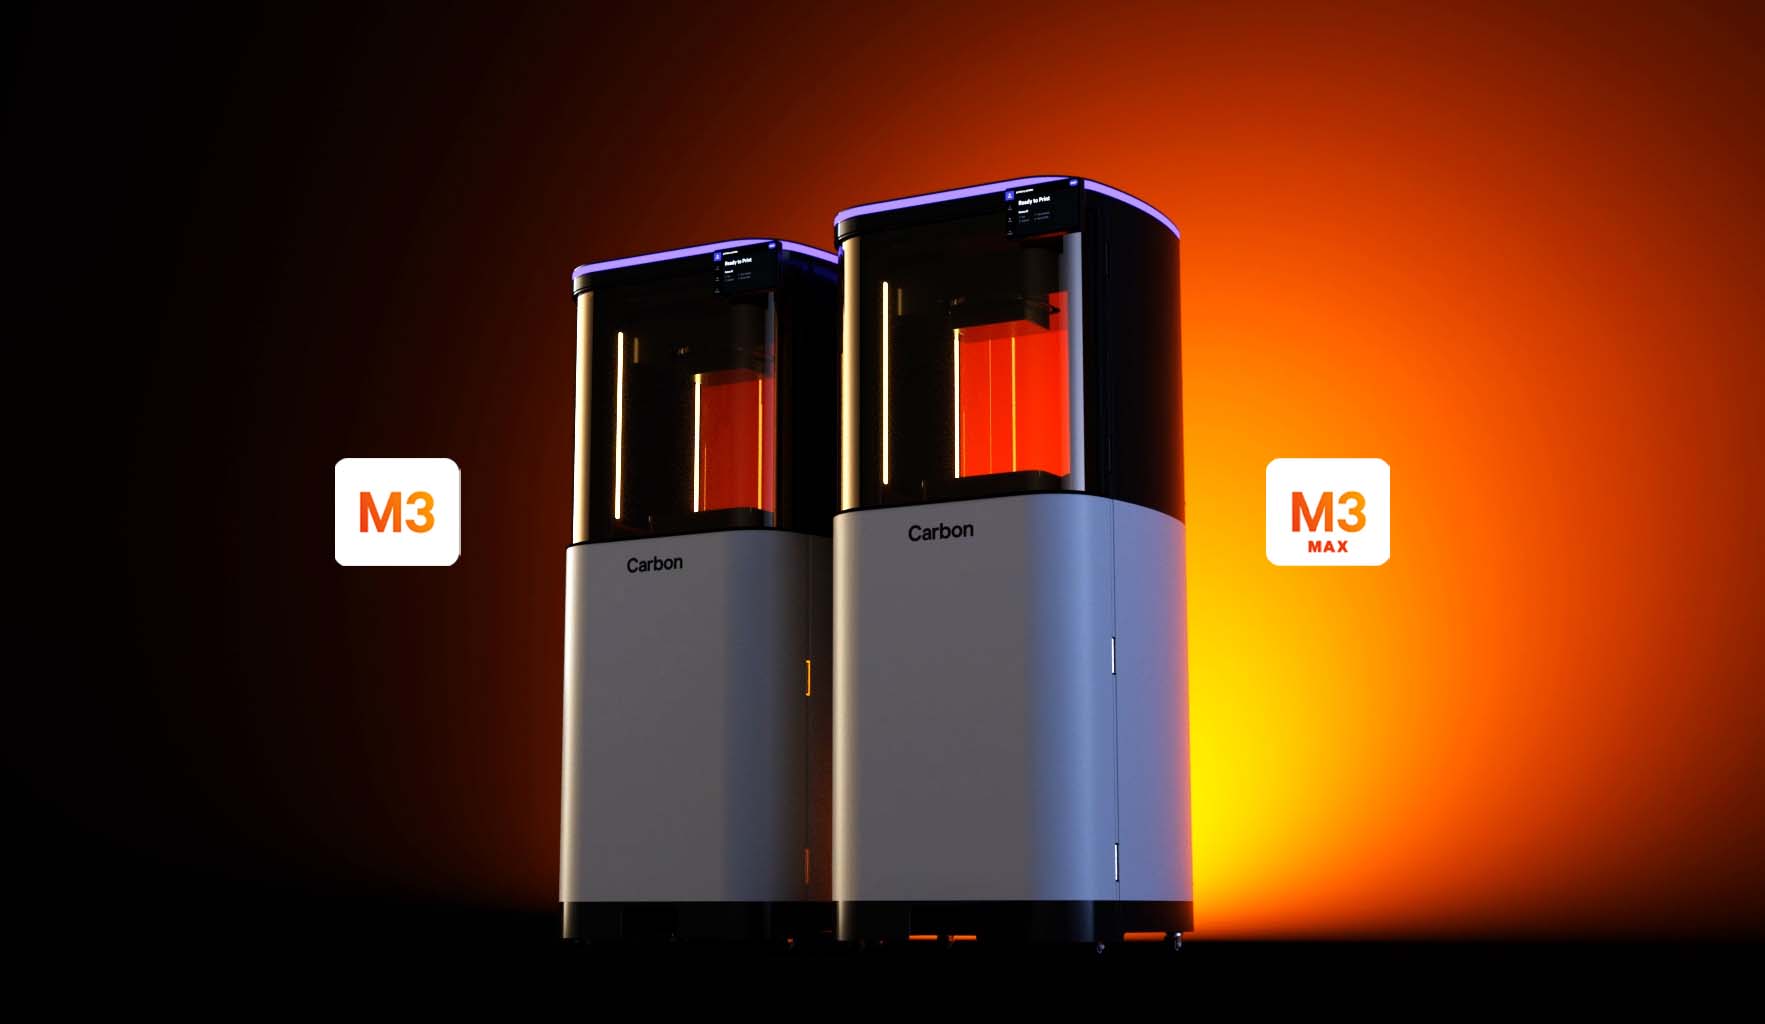 Statistisk oversættelse Bogholder Carbon launches its new M3 and M3 Max 3D printers - technical  specifications and pricing - 3D Printing Industry